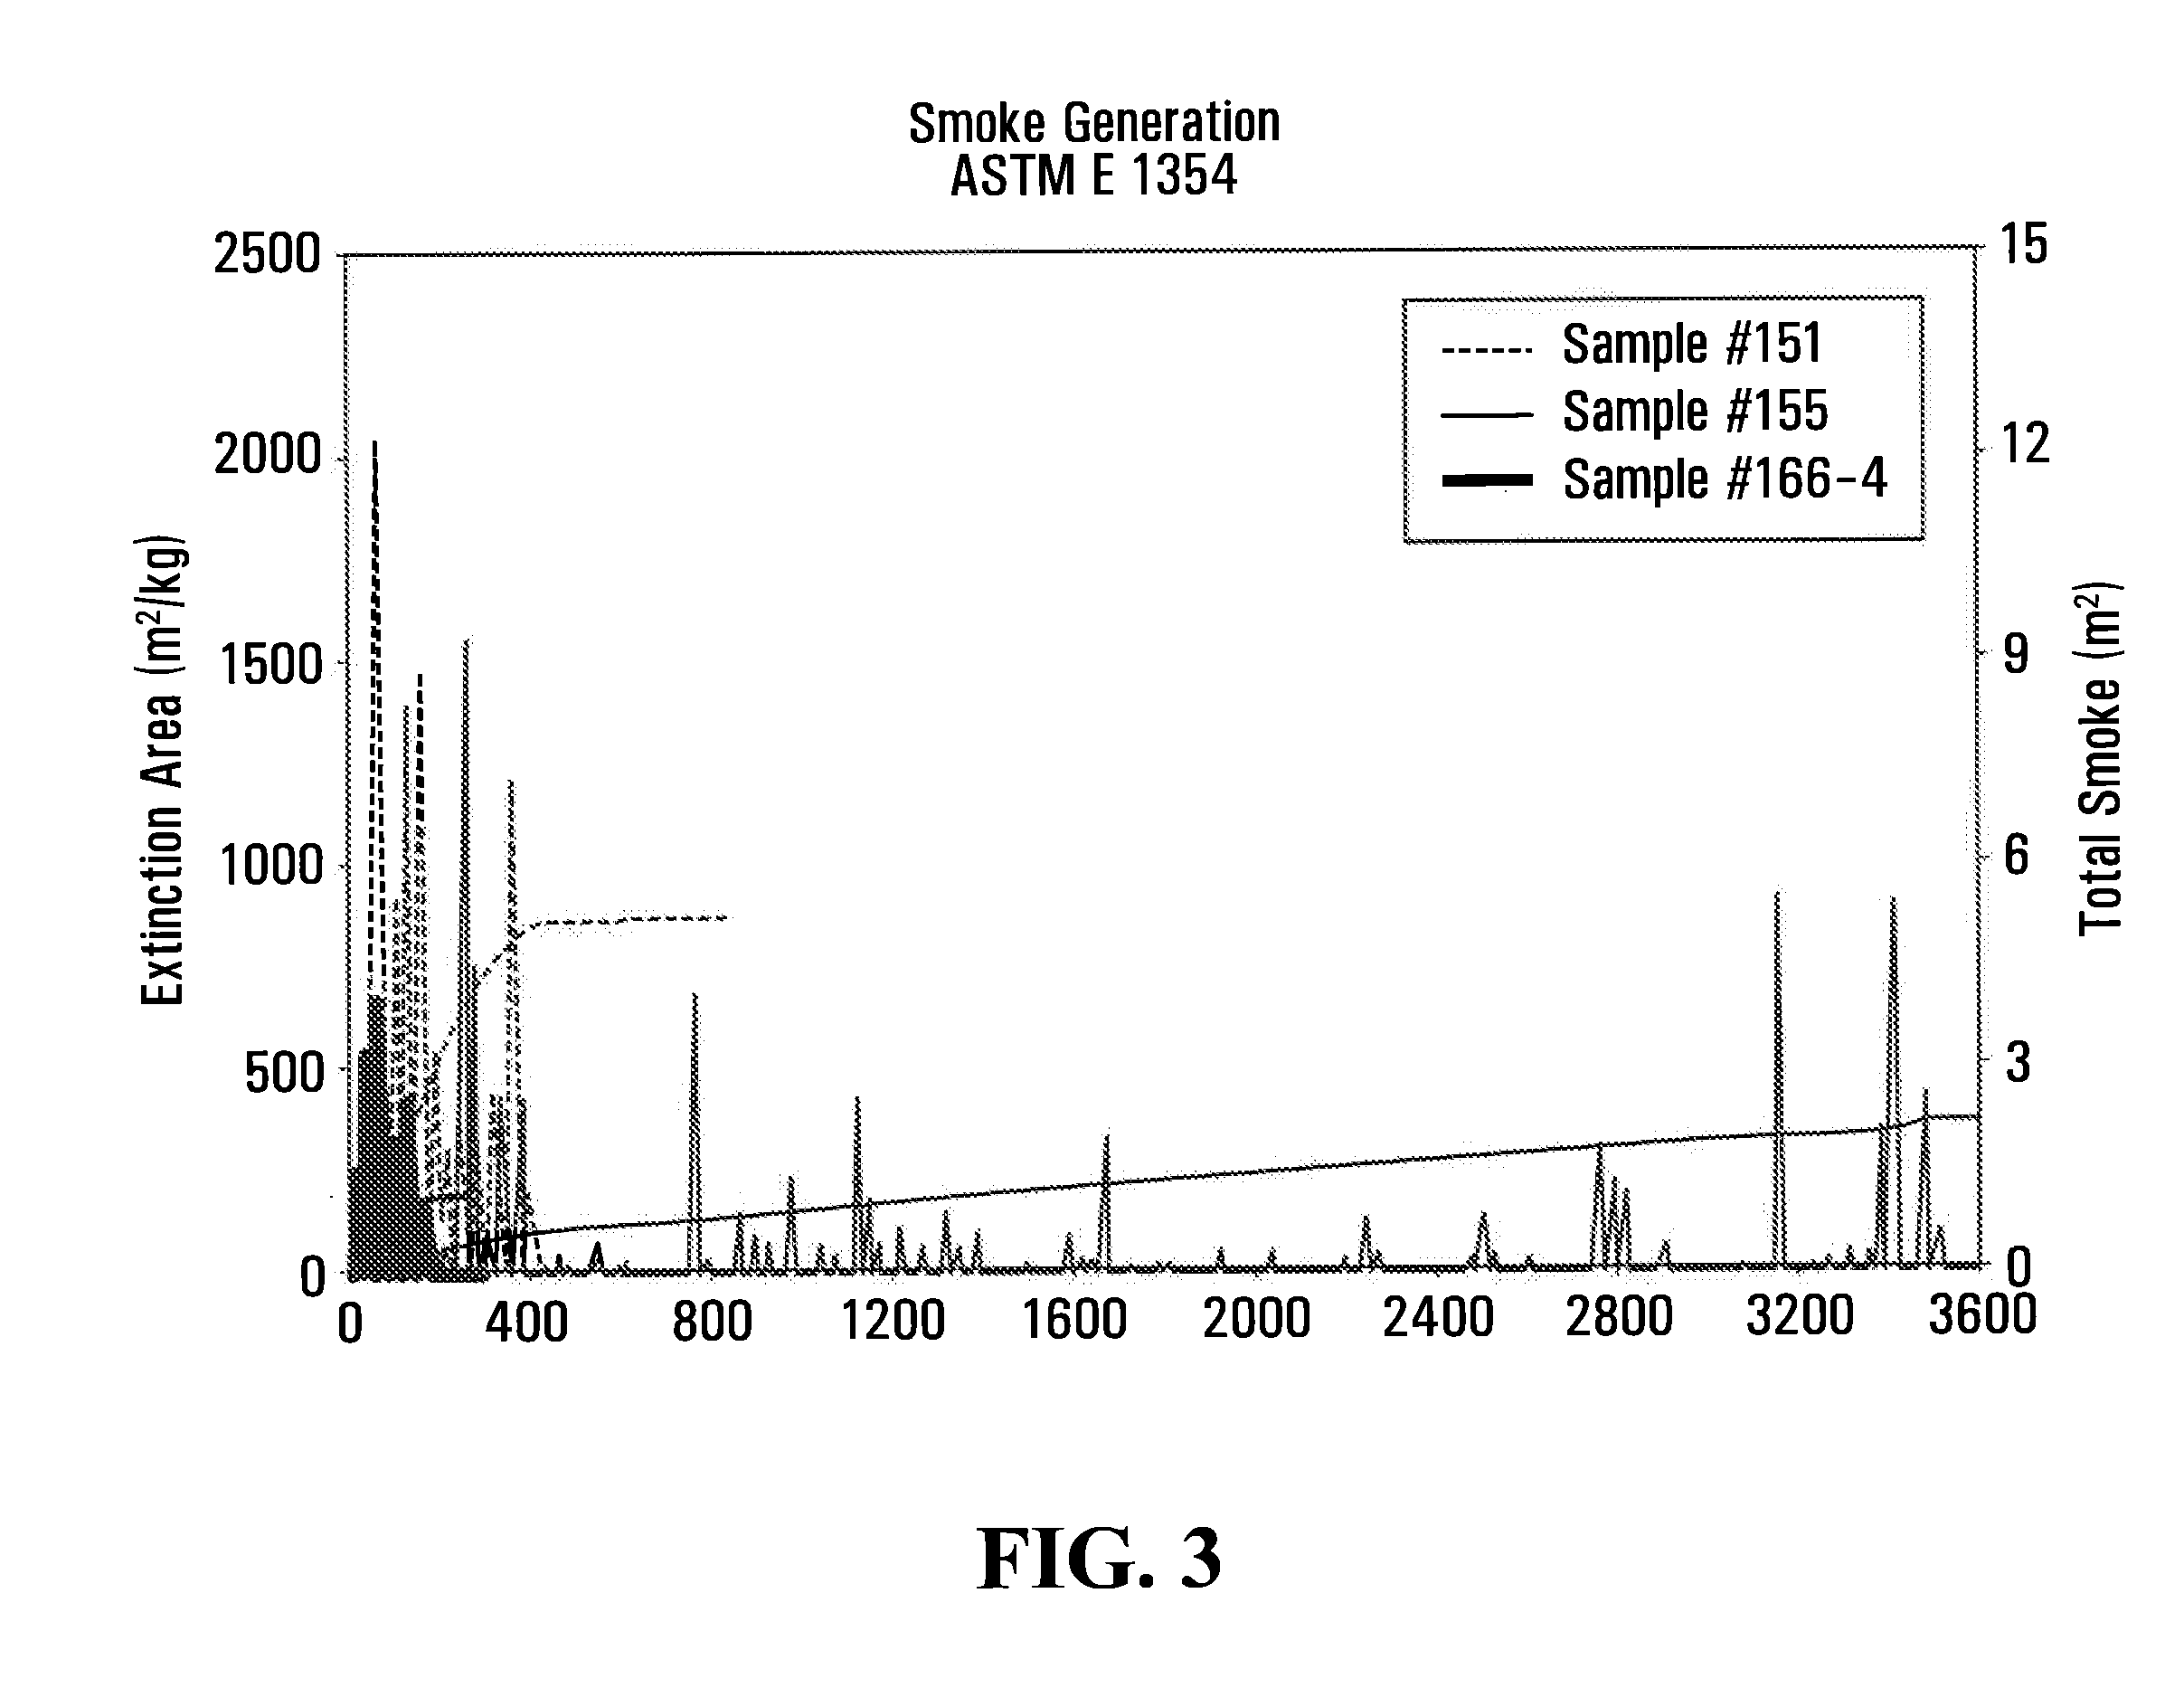 Firestop Composition Comprising Thermoplastic, Intumescent, and Flame Retardants